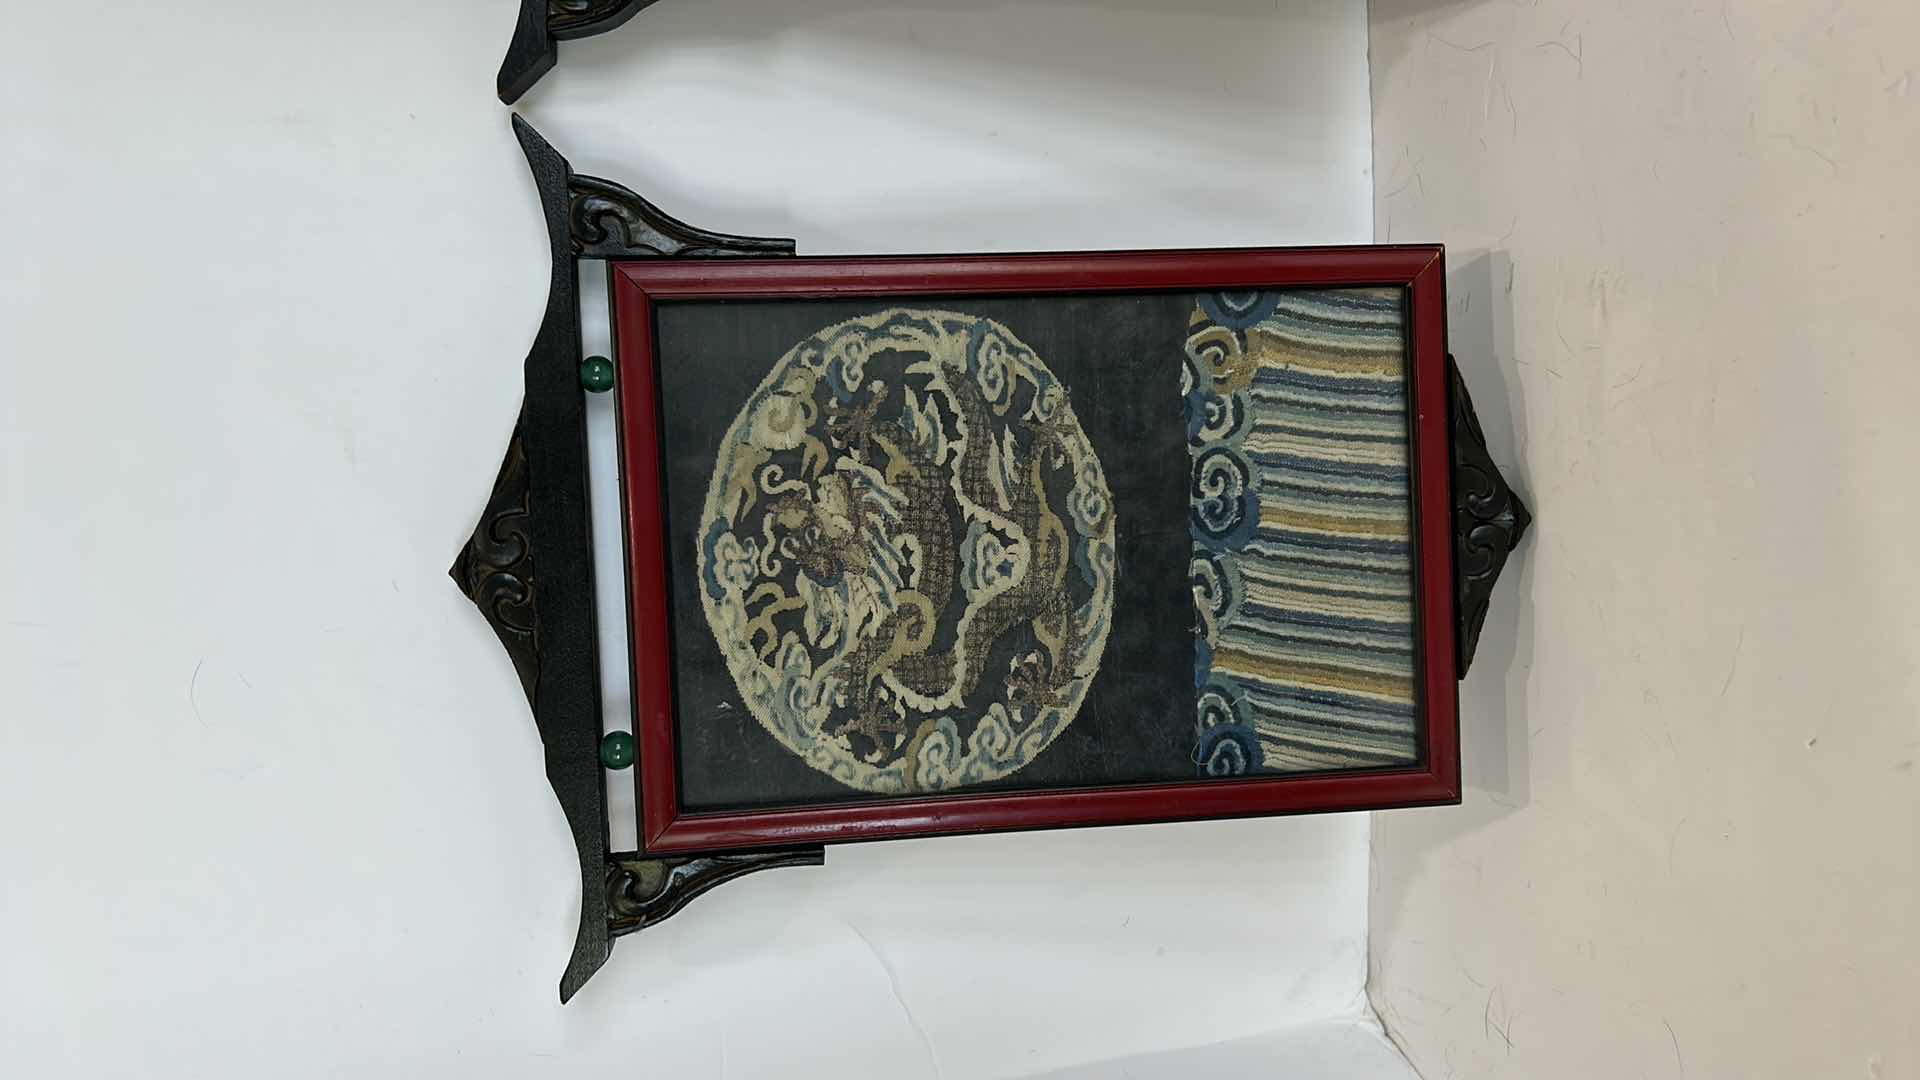 Photo 2 of 2 - ANTIQUE CHINESE TEXTILE FABRIC, SILK WITH SILK THREAD HAND EMBROIDERY ARTWORK FRAMED  9 1/2 x 12 1/4”